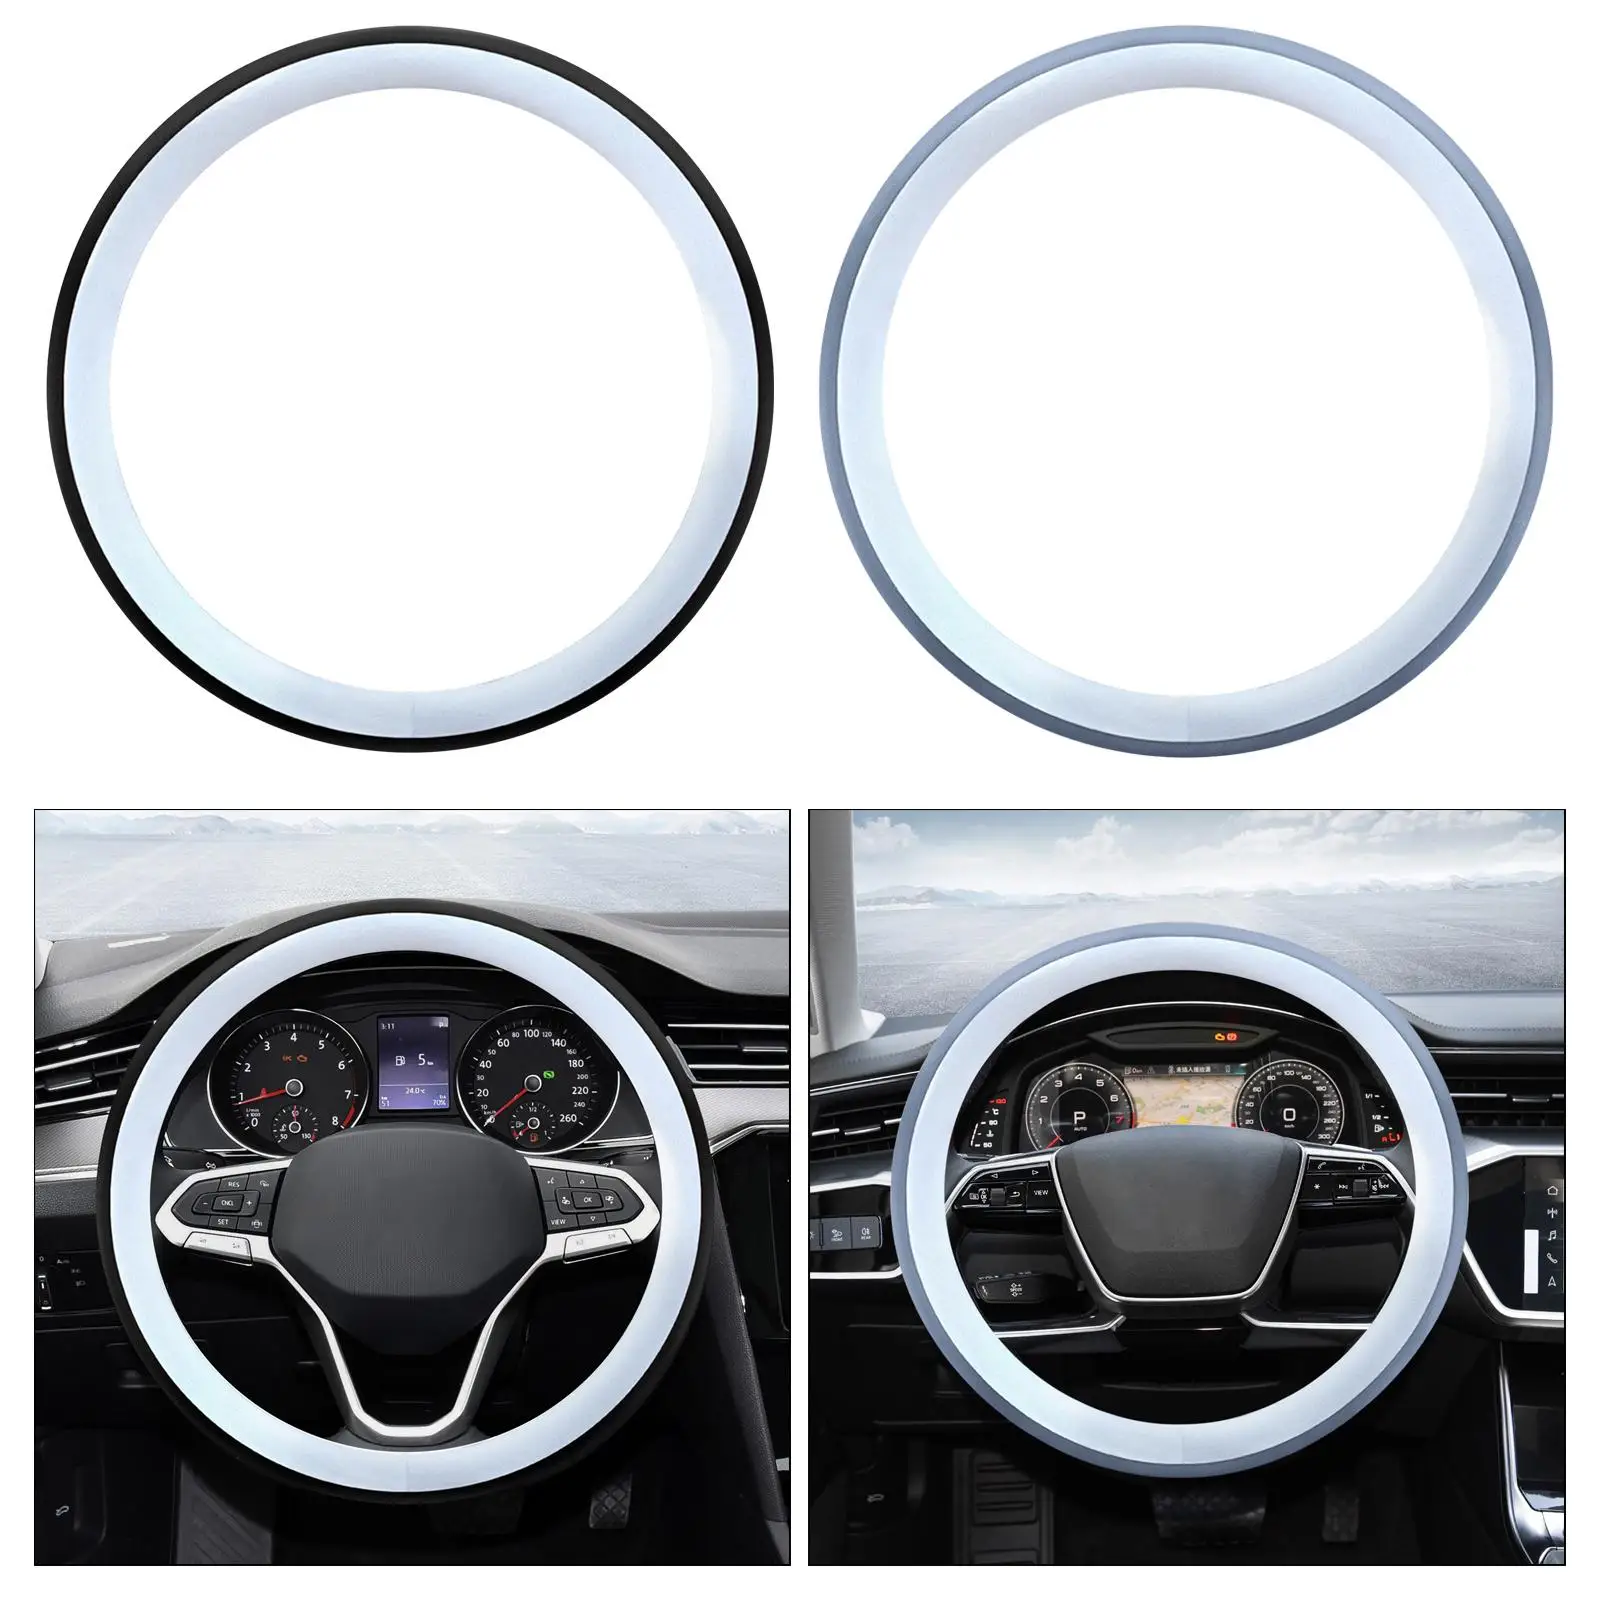 38cm Car Steering Wheel Cover for Suvs Trucks Auto Accessories Lightweight Winter Comfortable Protective Cover Comfortable Grip